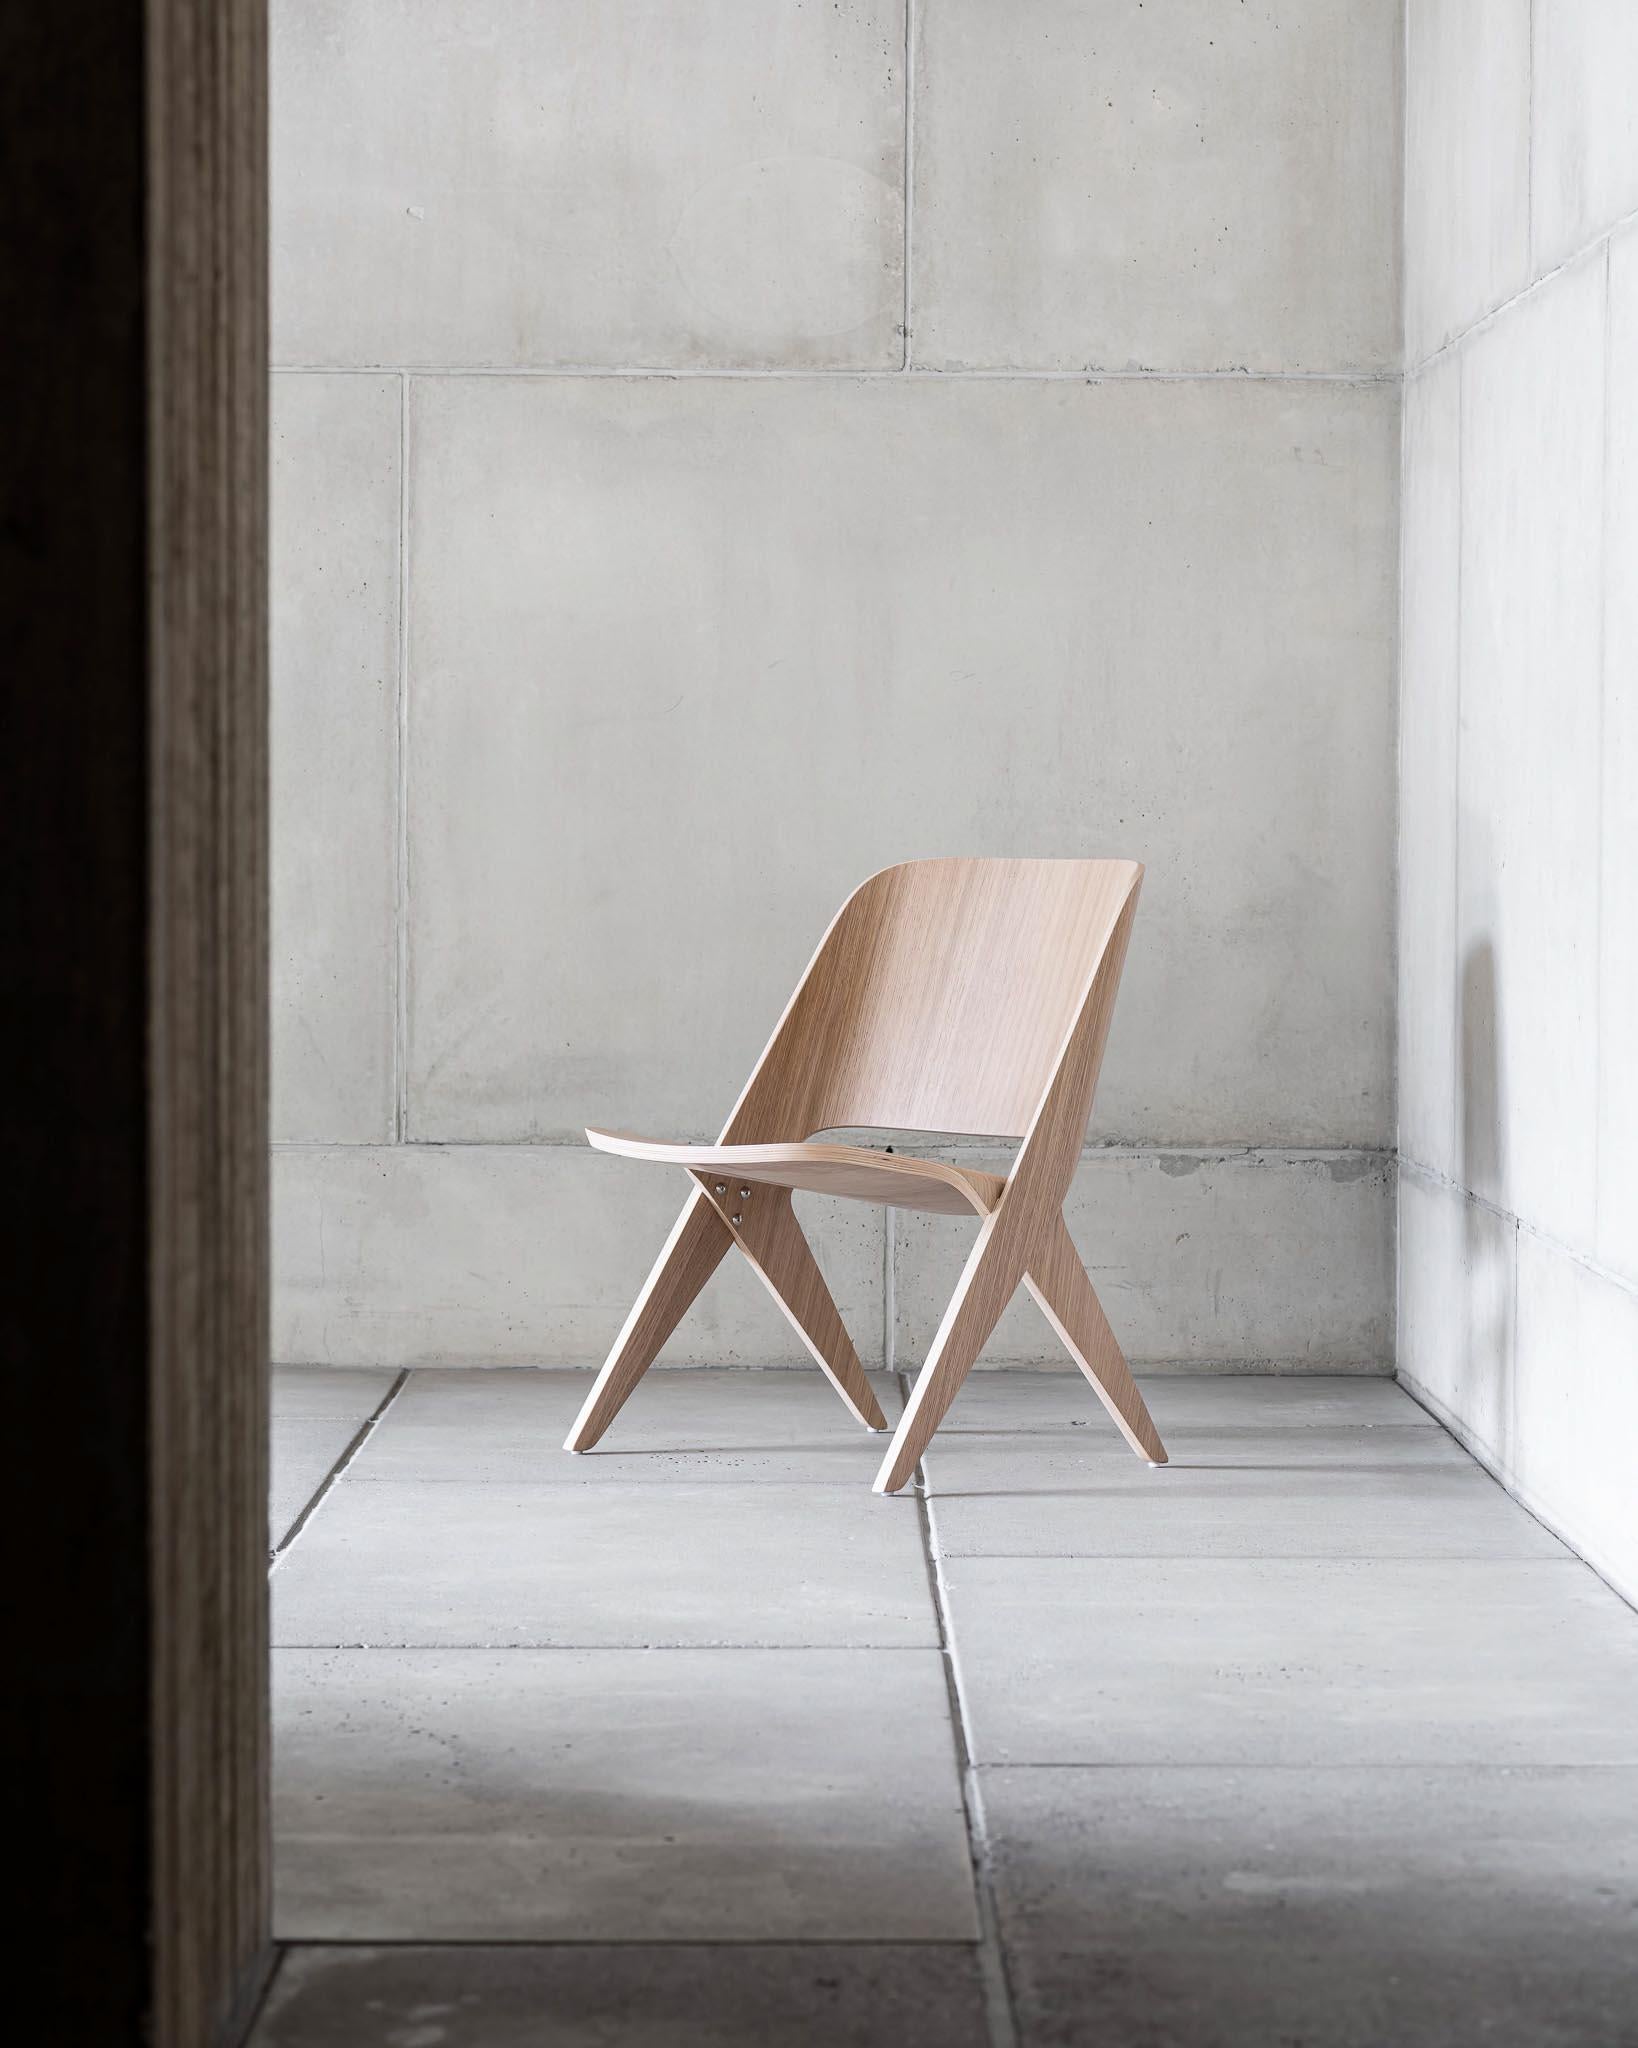 Lavitta chair by Poiat 
Designers: Timo Mikkonen & Antti Rouhunkoski
Collection Lavitta 2020

Model shown: Wood stain - Oak 
Dimensions: D. 61 x W. 68 x H. 73 

The Lavitta Chair is a modern classic that focuses on the sophisticated union of